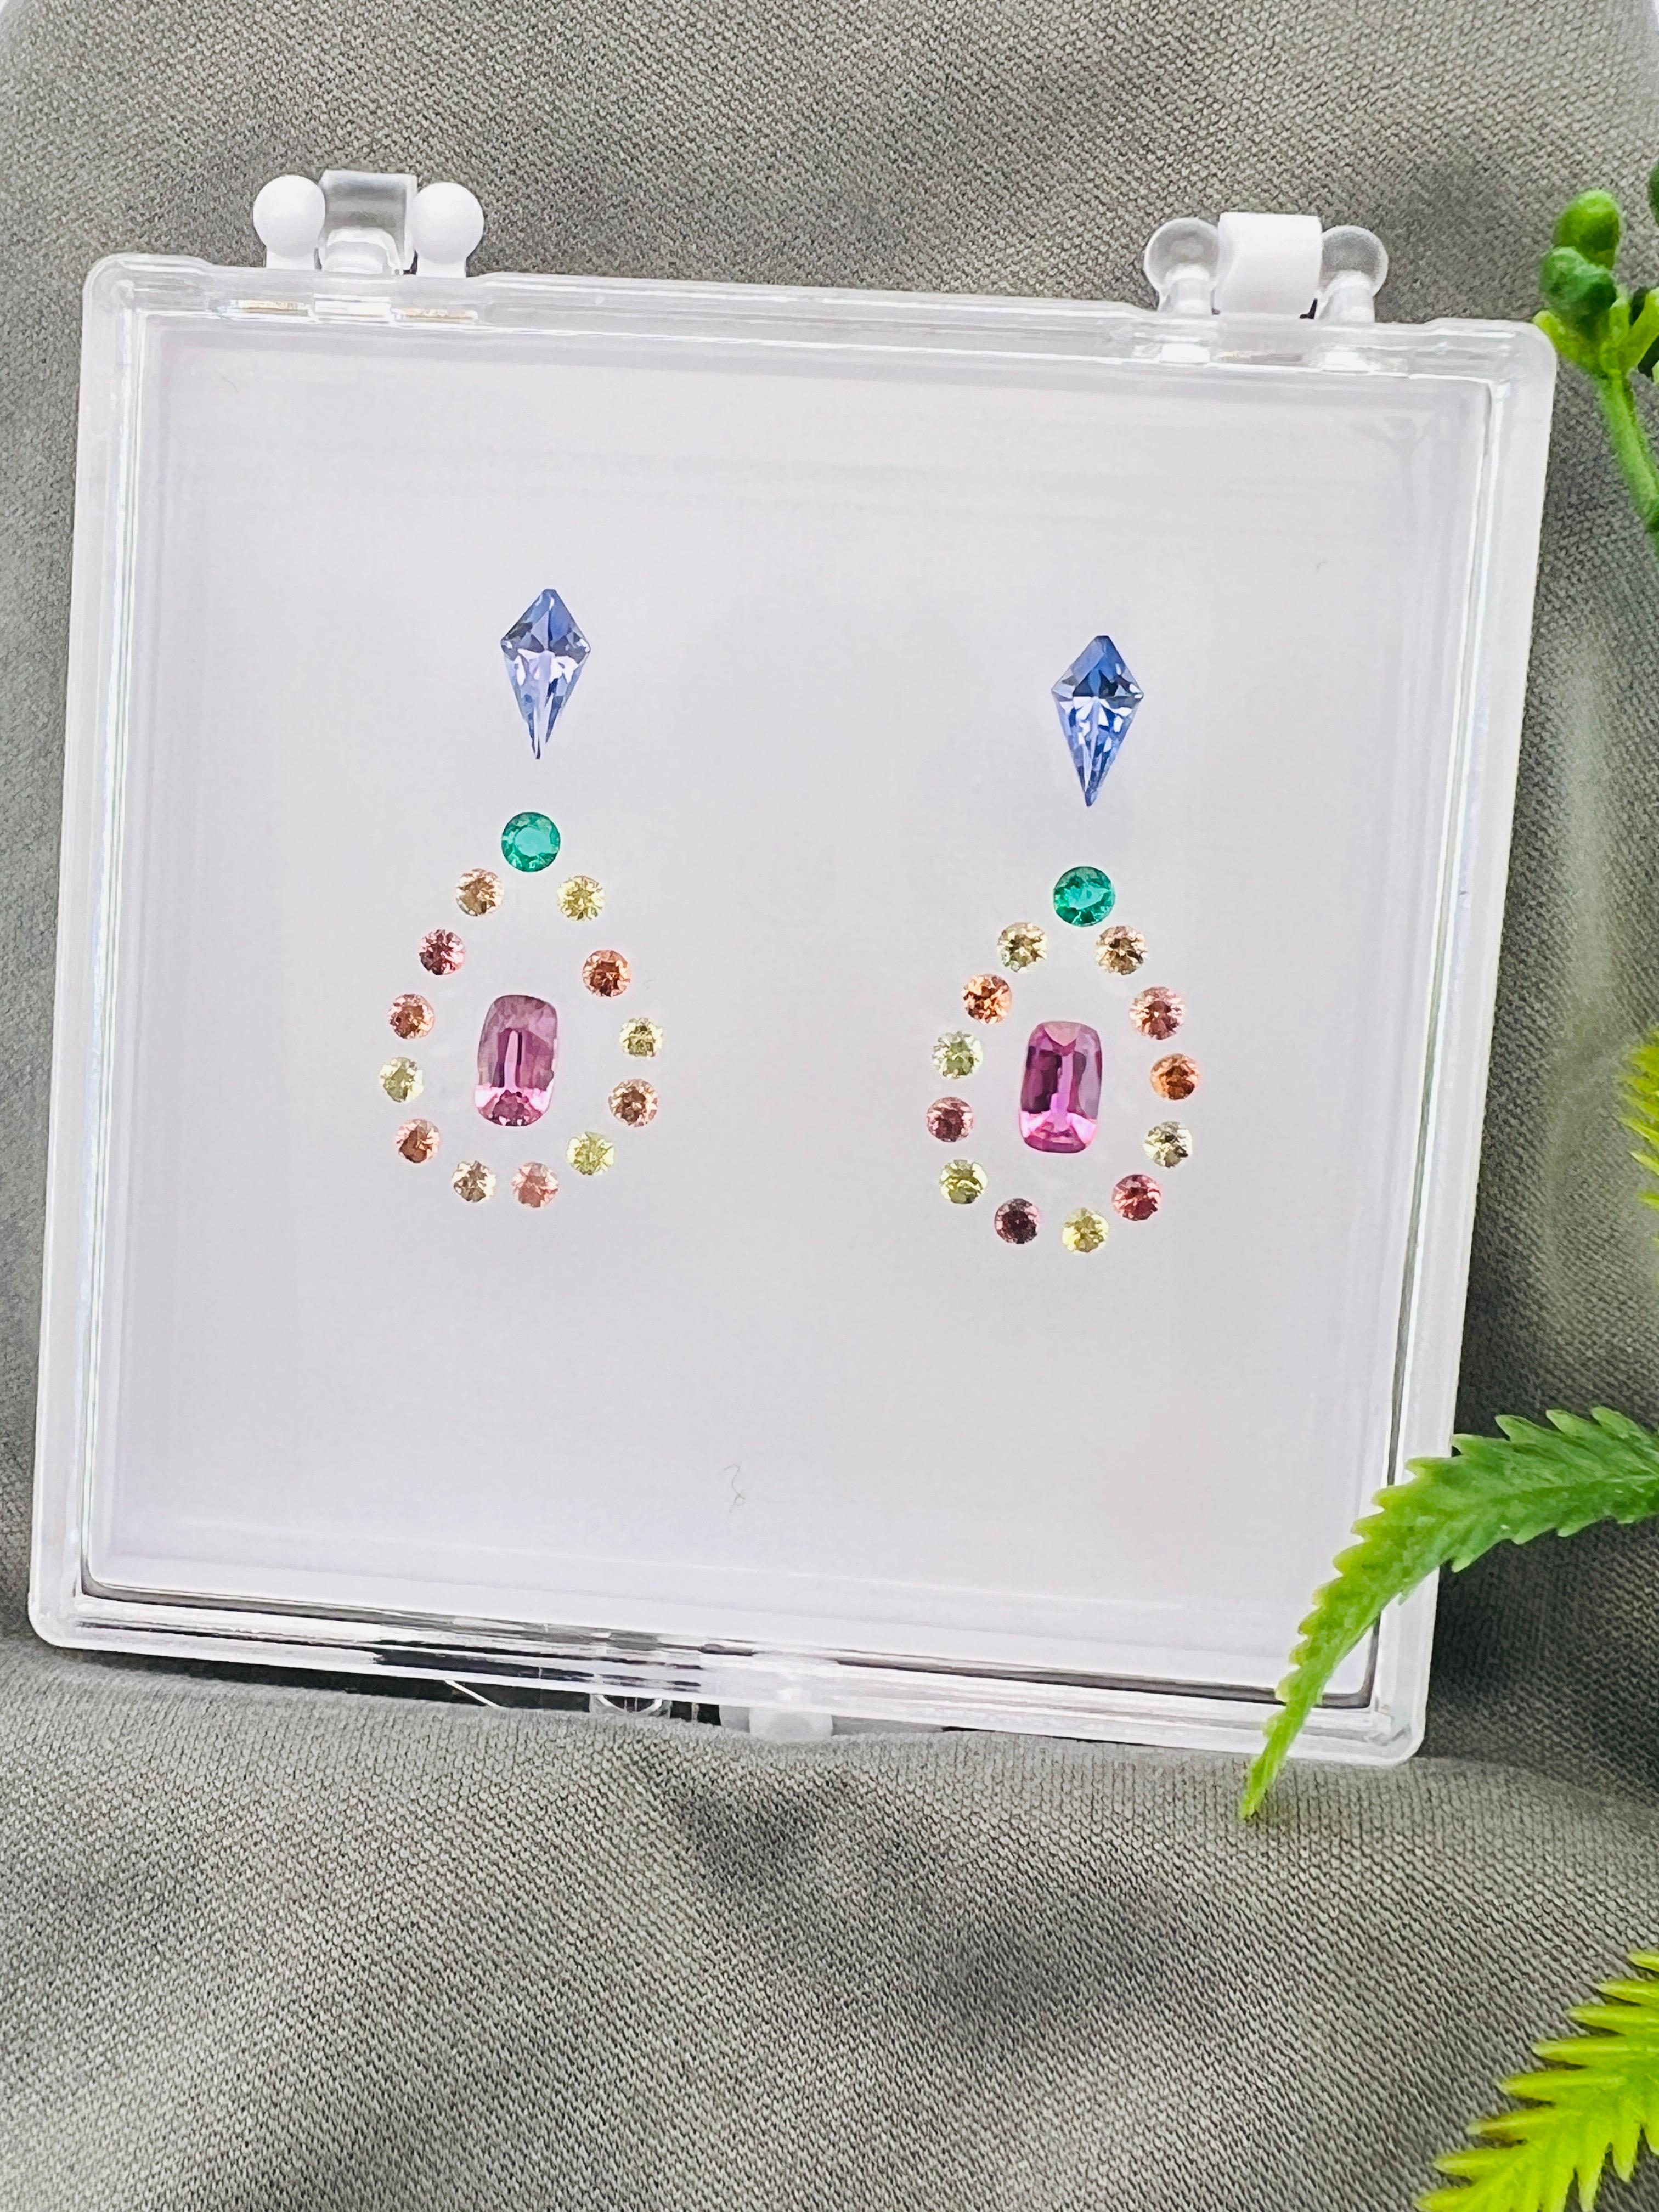 Women's Unique earring design by WB all natural color gemstone 2.09ct customize jewelry 